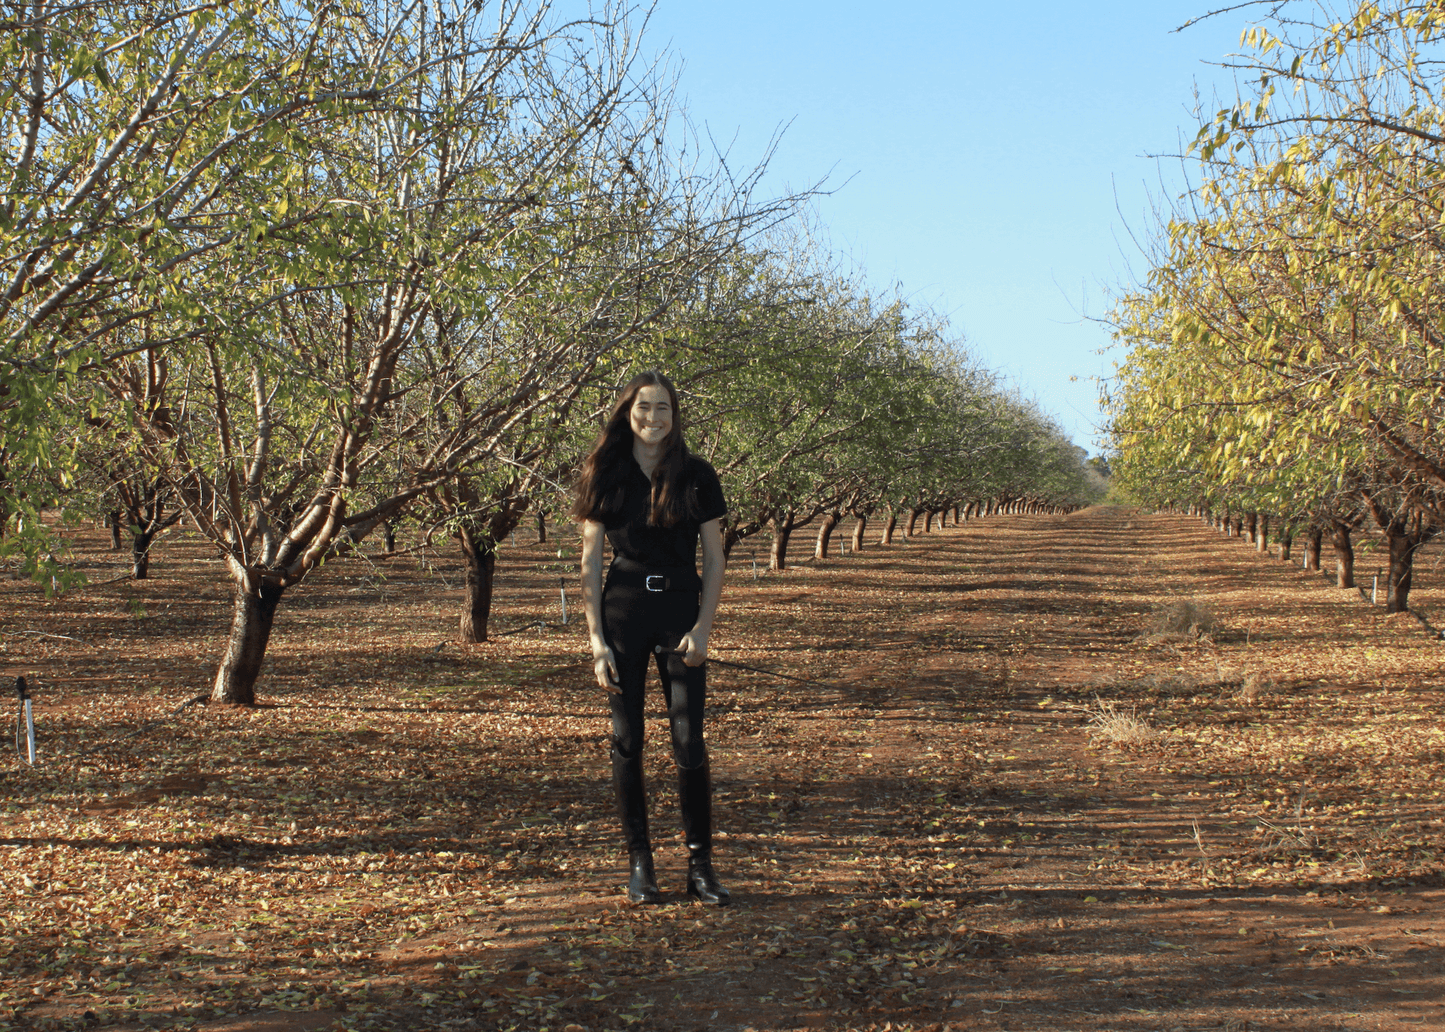 Woman in horse riding tights stands among orchard tree rows.